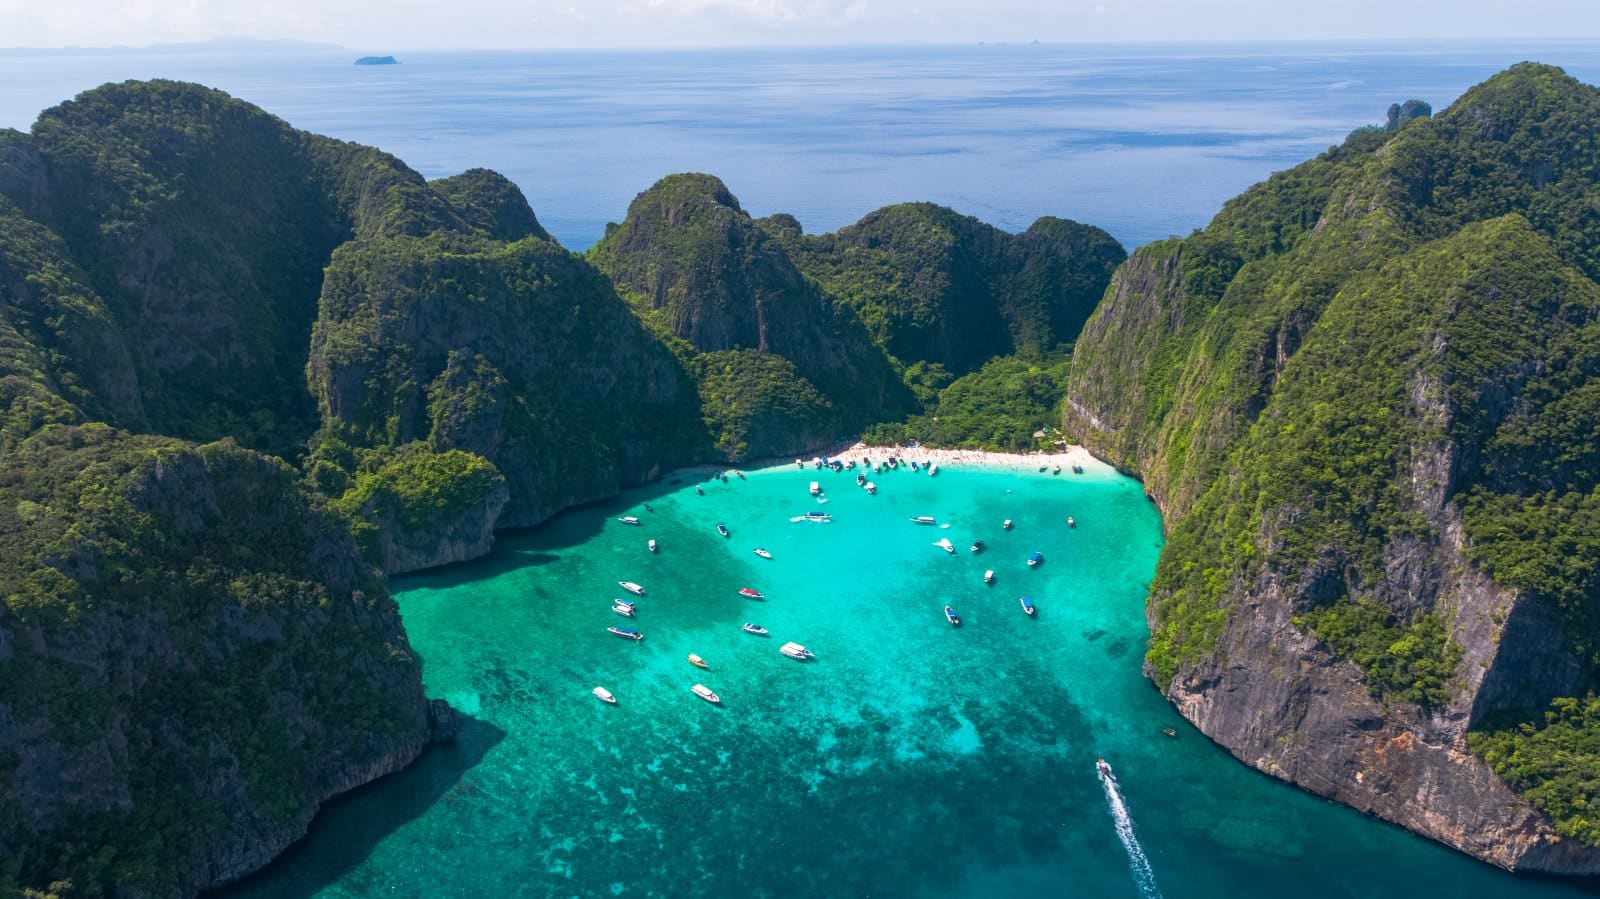 <p class="wp-caption-text">Image Credit: Shutterstock / Drone Thailand</p>  <p>Thailand’s warm hospitality, pristine beaches, and ornate temples create a paradise for travelers. The bustling markets, tranquil islands, and delicious street food offer an unforgettable experience.</p>